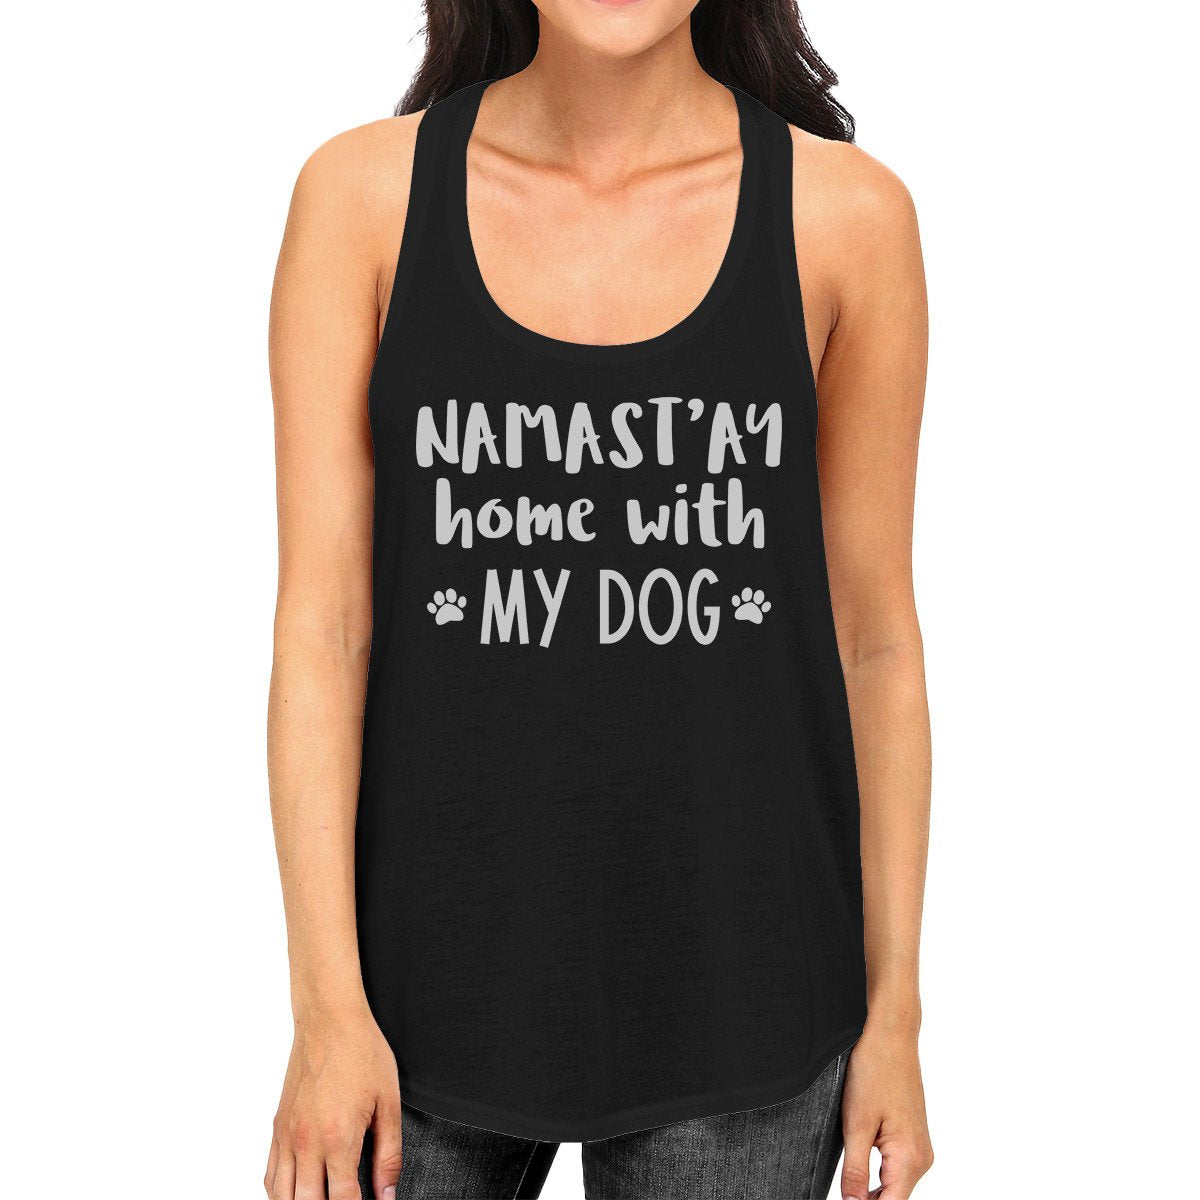 Namastay Home Womens Black Sleeveless Top Cute Gift for Dog Lovers - LOLA LUXE